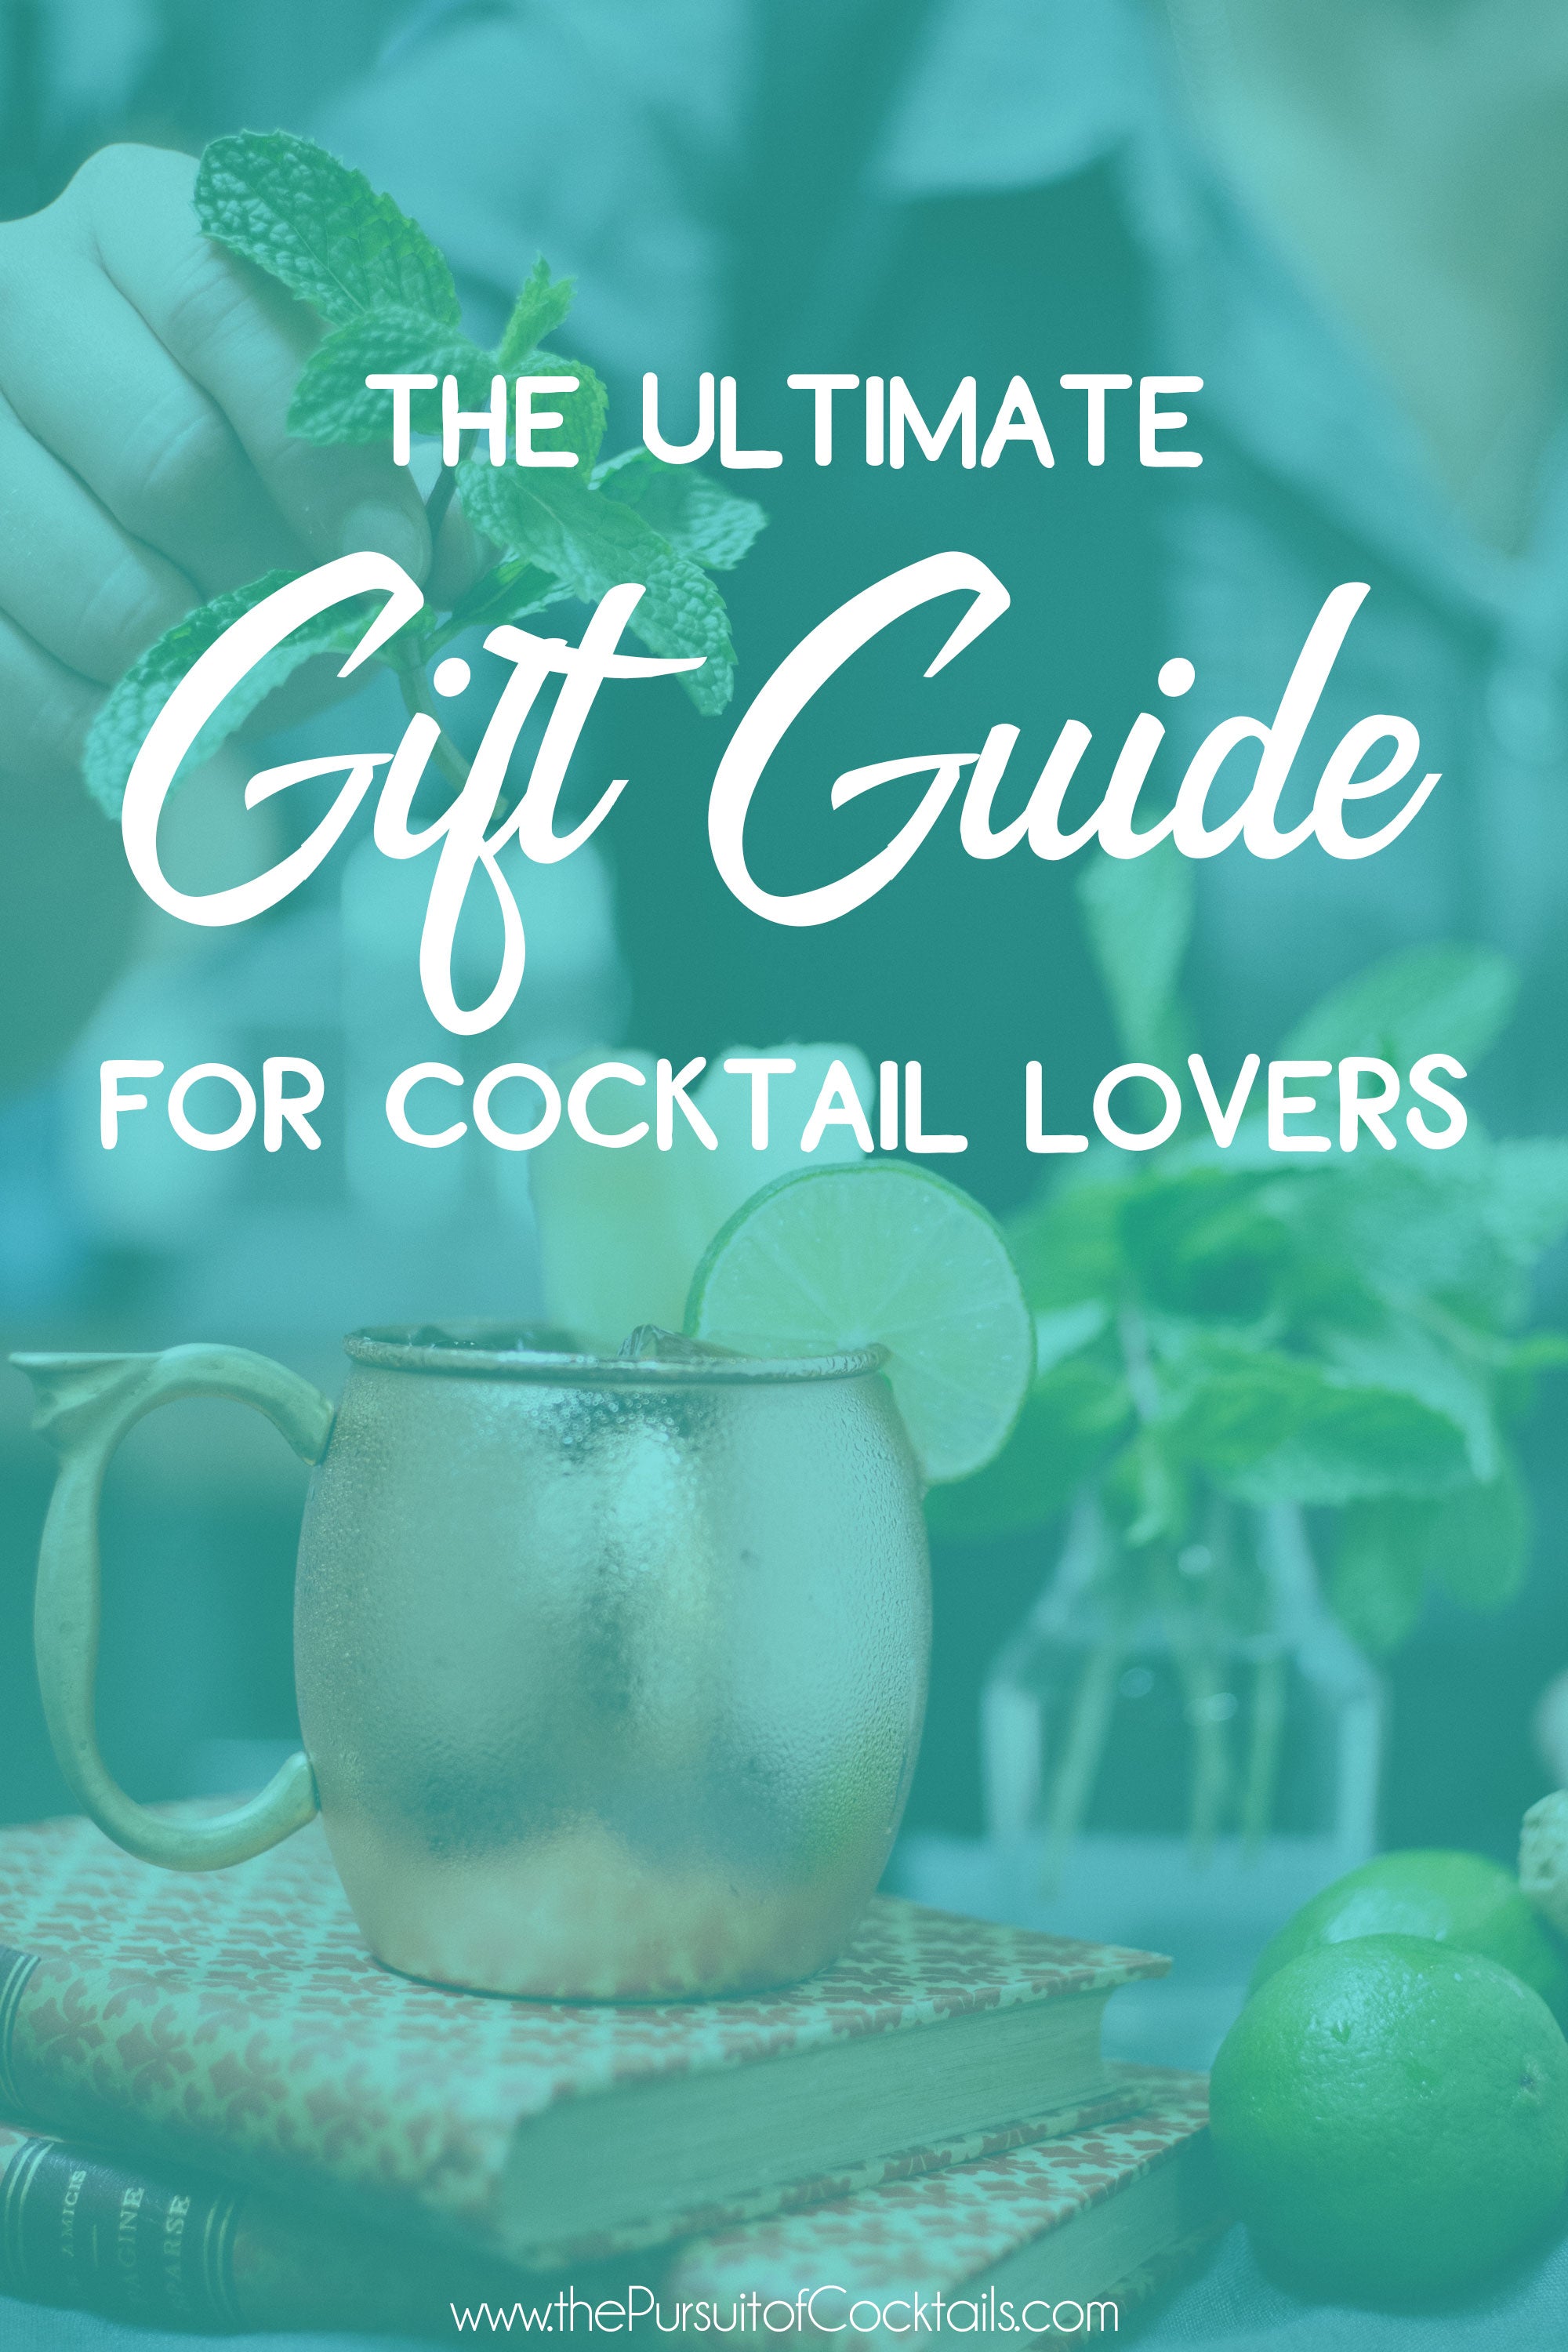 Gift guide for cocktail lovers, home bartenders and mixologists from The Pursuit of Cocktails